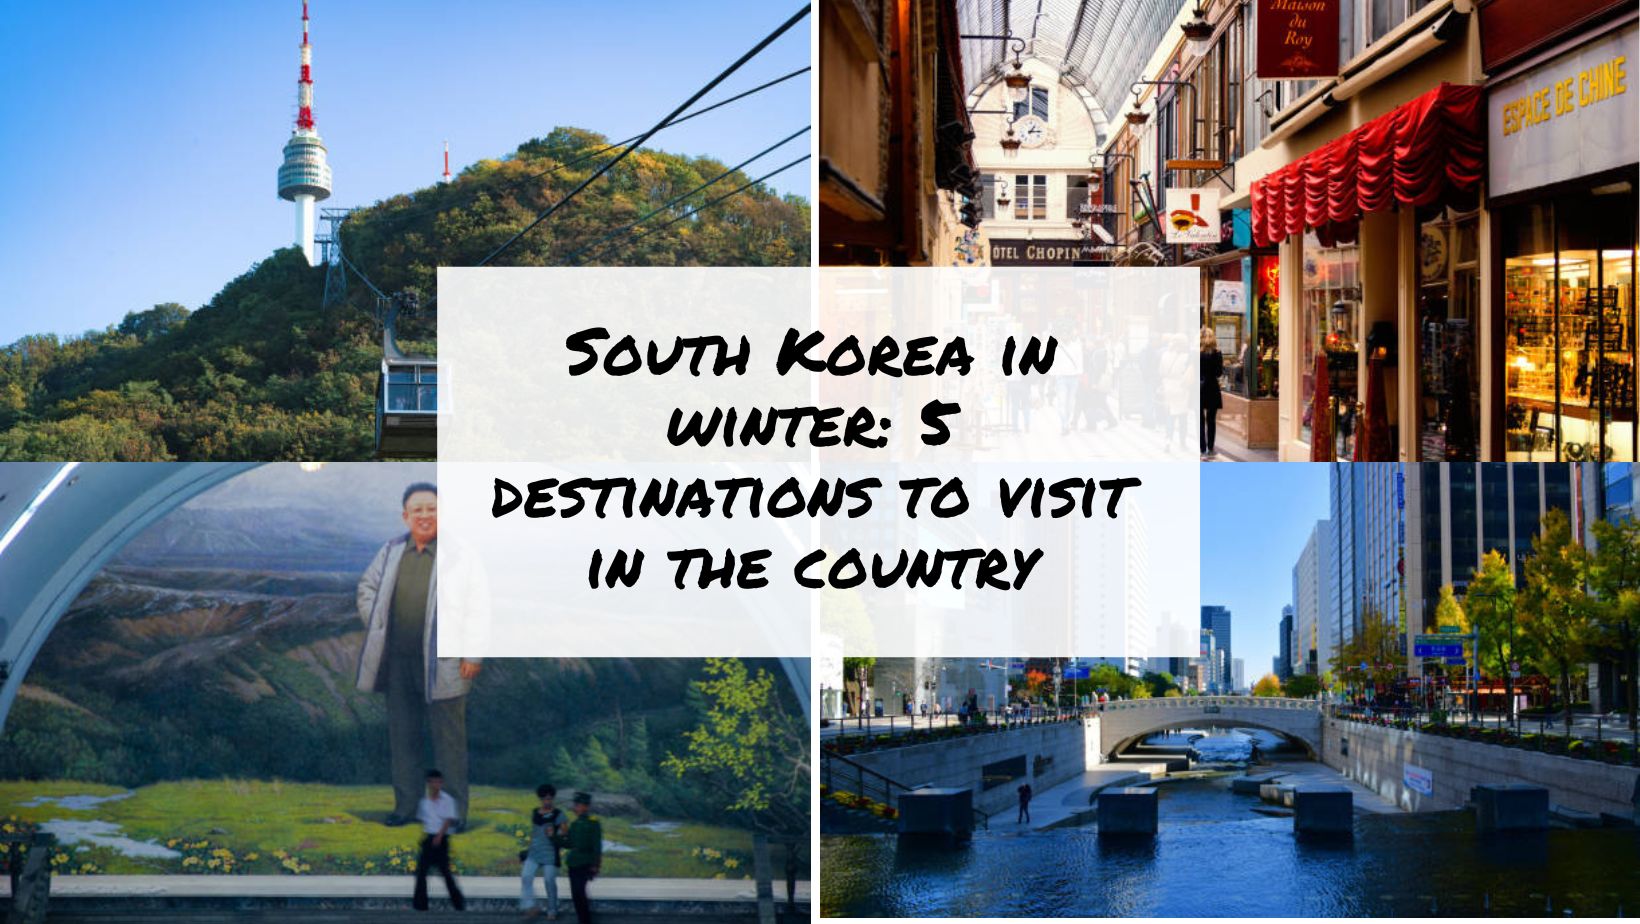 South Korea in winter 5 destinations to visit in the country